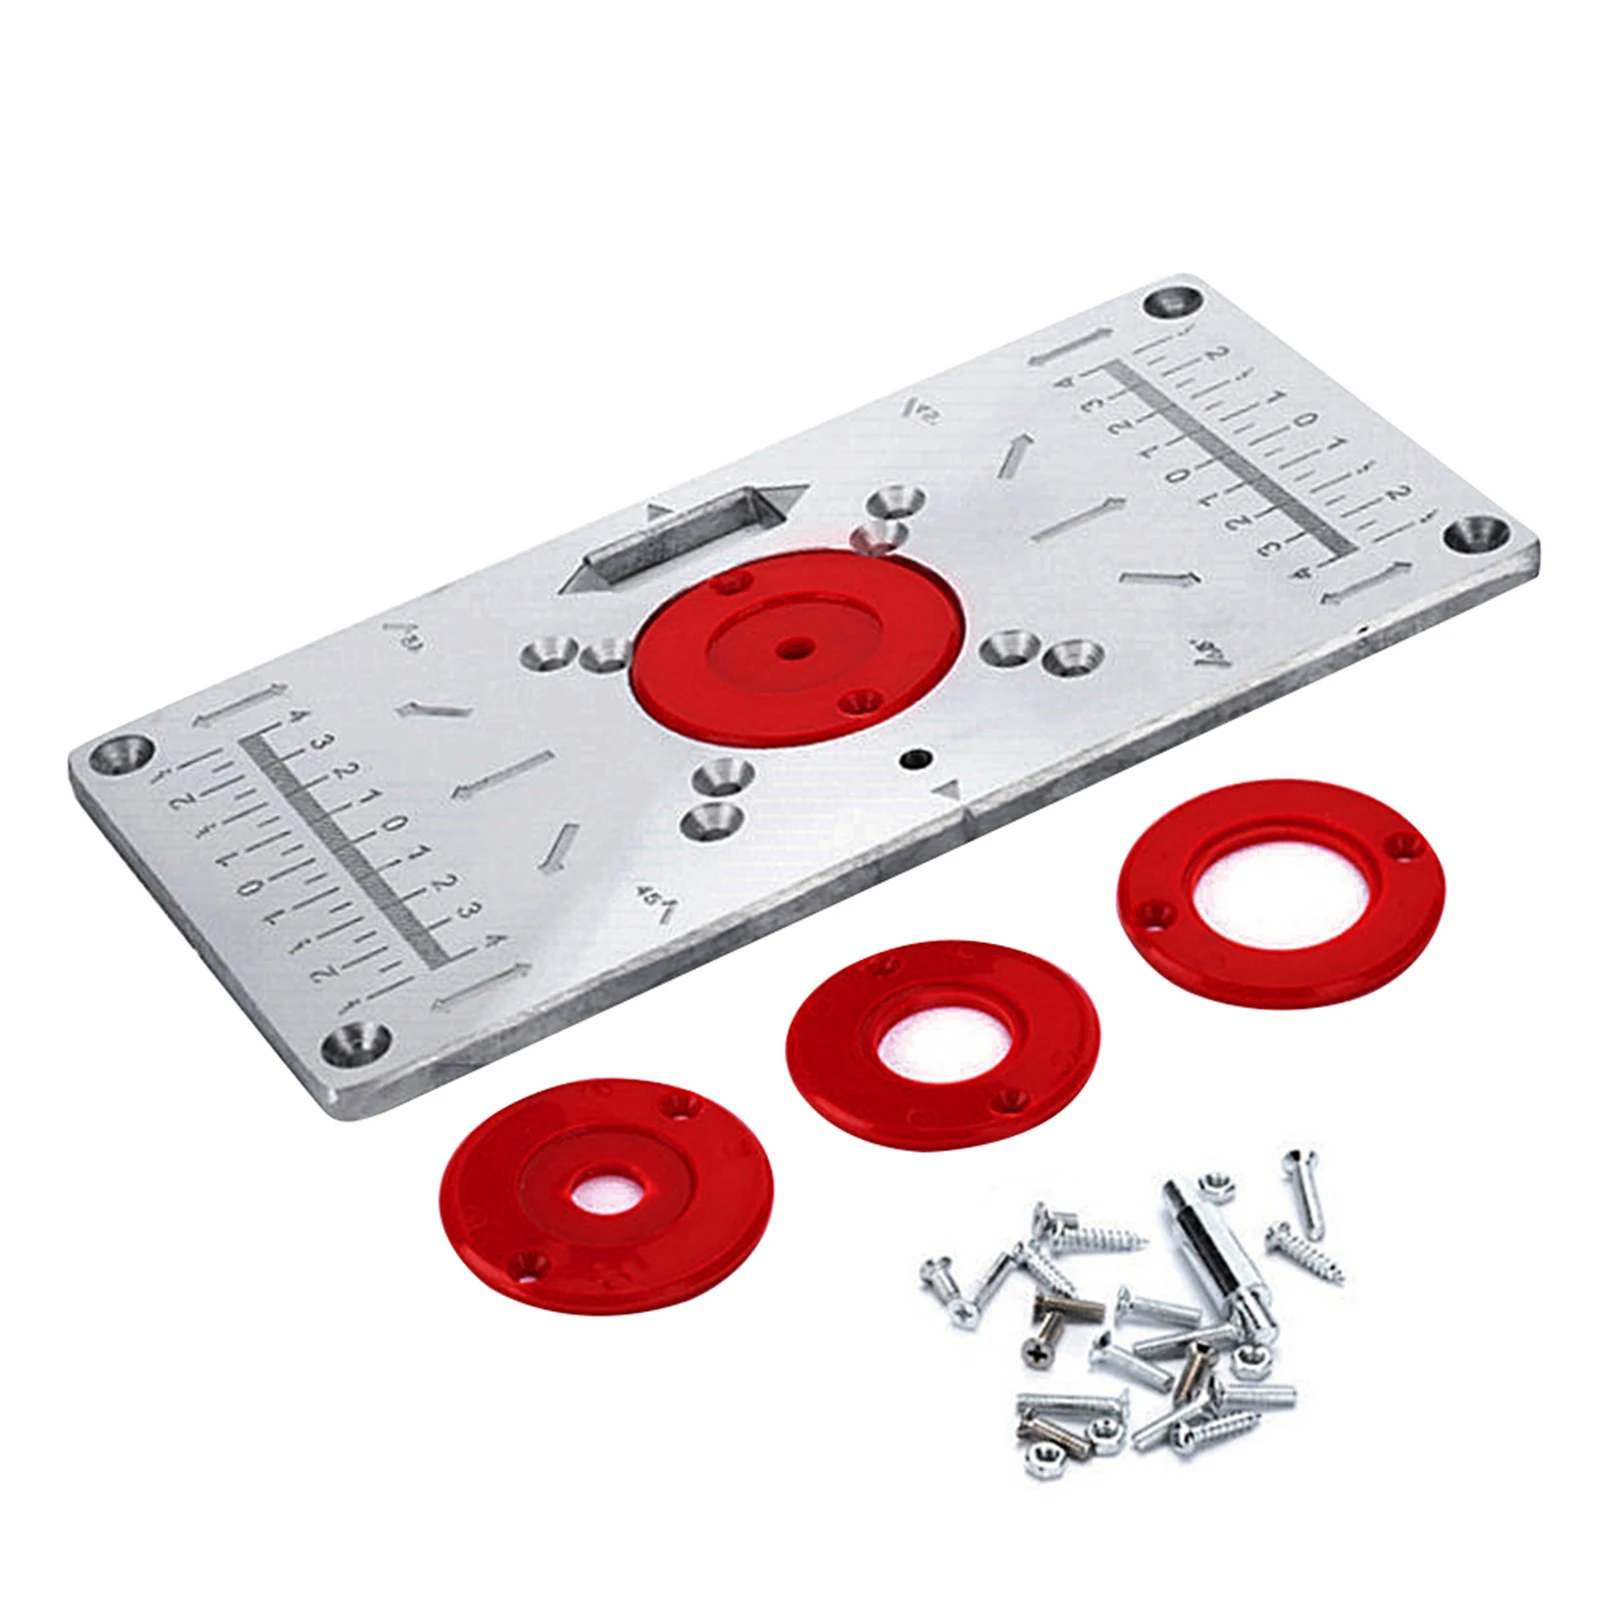 

Multifunction Trimming Machine Flip Panel Aluminium Alloy Power Tools Repair Easy Install For Woodworking Insert Plate Durable